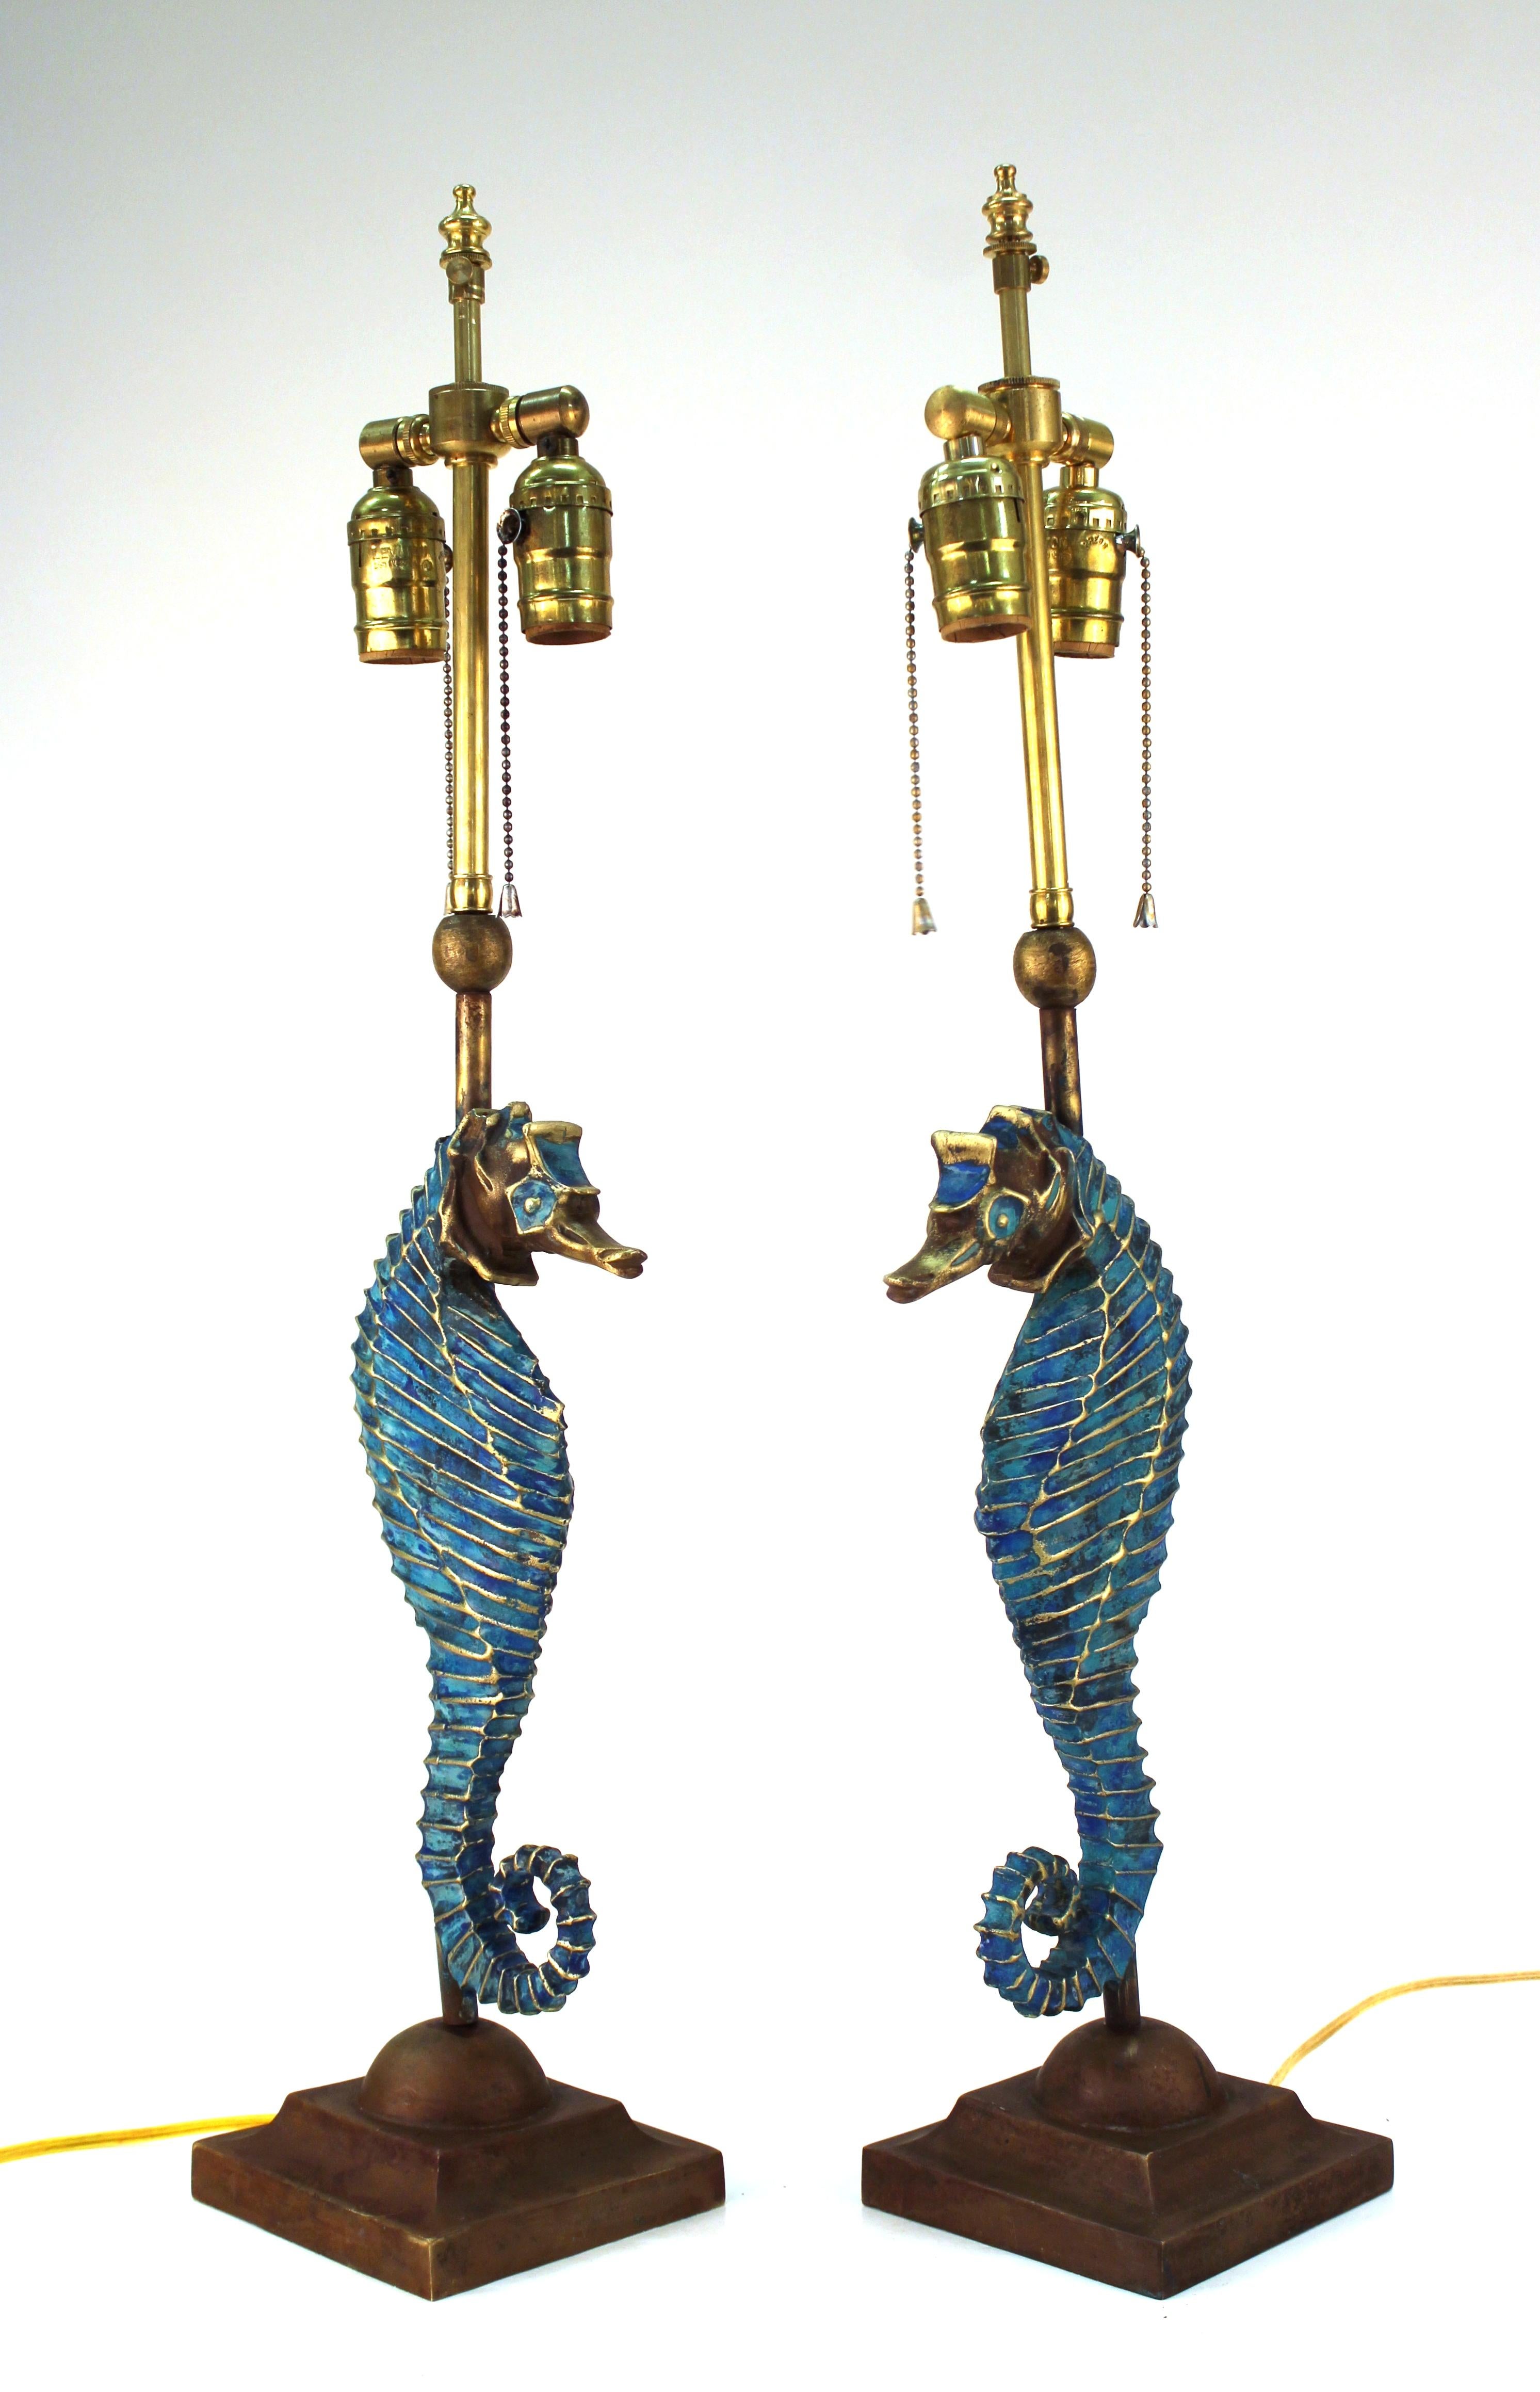 Pair of Pepe Mendoza style Mid-Century Modern table lamps in the shape of blue seahorses on square bases, each bearing the makers mark and patent. The pair has recently been rewired to meet standards and has extendable harps on top. In excellent